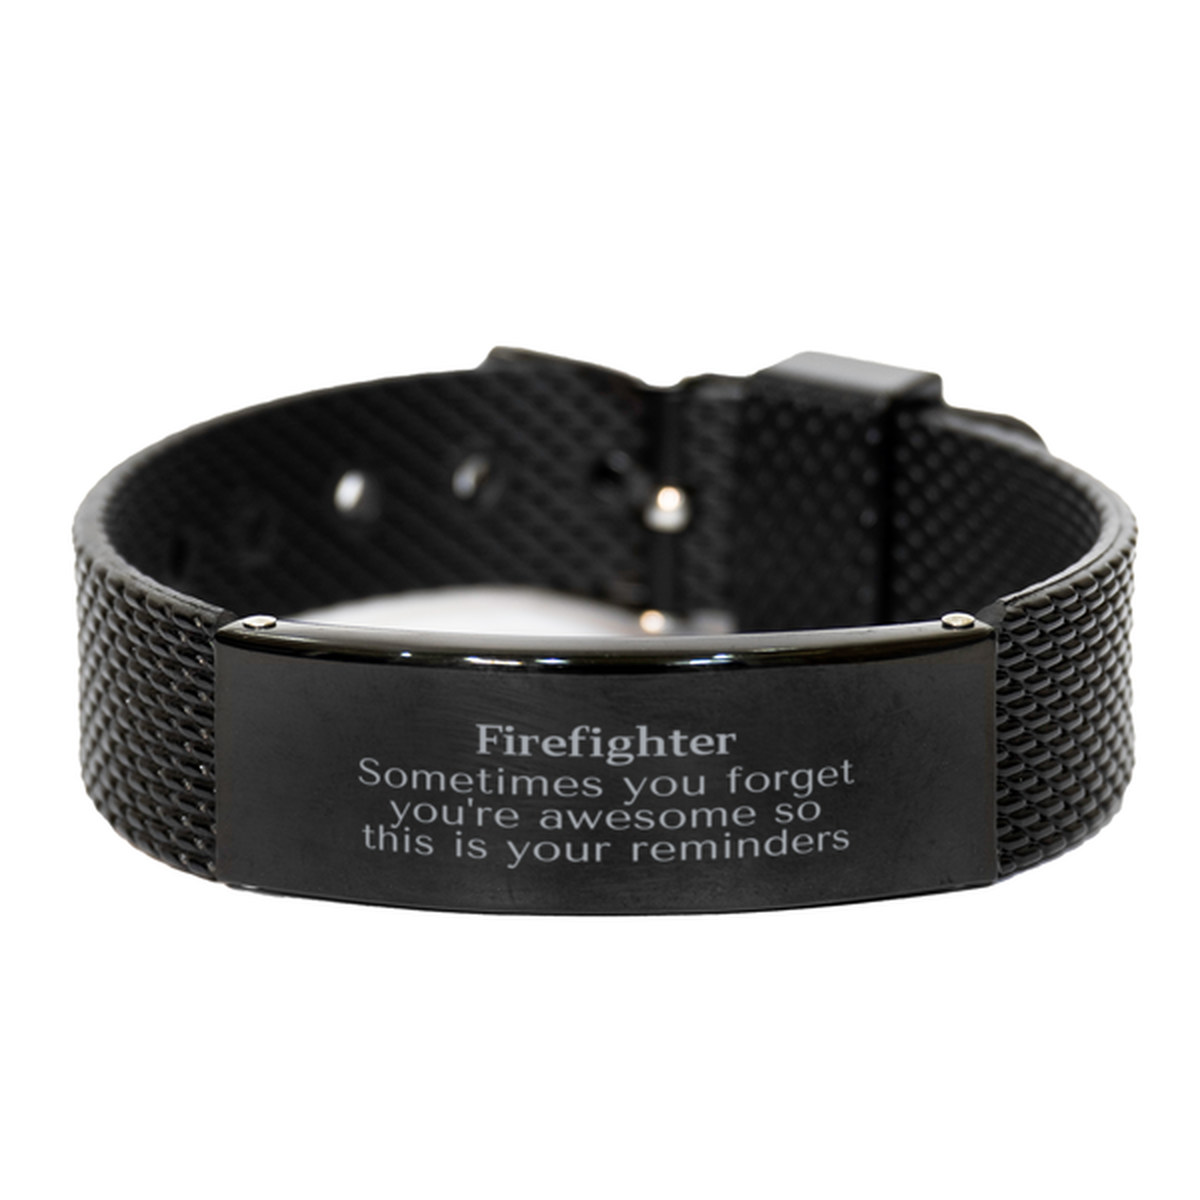 Sentimental Firefighter Black Shark Mesh Bracelet, Firefighter Sometimes you forget you're awesome so this is your reminders, Graduation Christmas Birthday Gifts for Firefighter, Men, Women, Coworkers